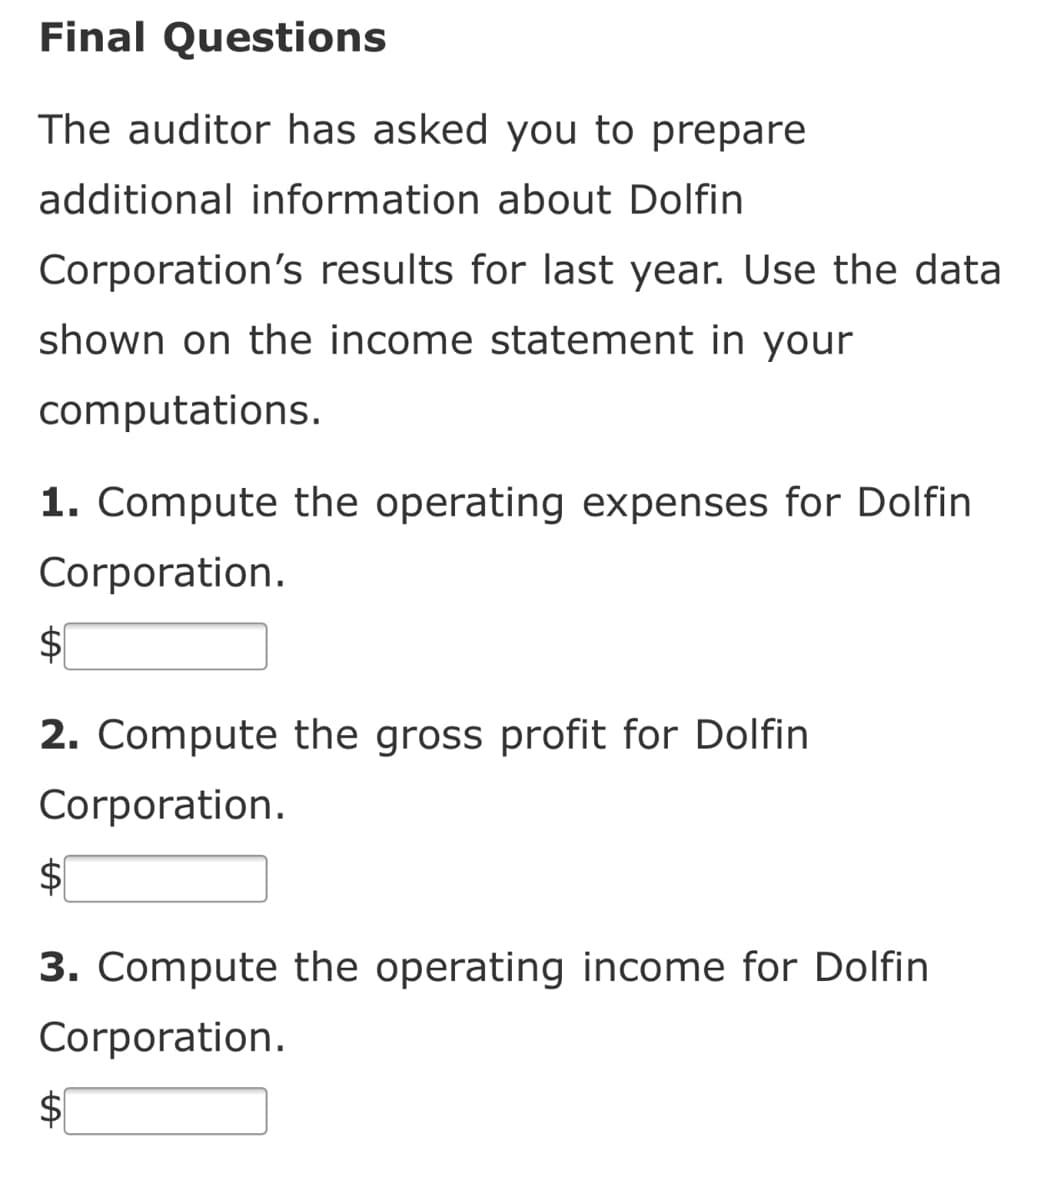 Final Questions
The auditor has asked you to prepare
additional information about Dolfin
Corporation's results for last year. Use the data
shown on the income statement in your
computations.
1. Compute the operating expenses for Dolfin
Corporation.
$1
2. Compute the gross profit for Dolfin
Corporation.
$1
3. Compute the operating income for Dolfin
Corporation.
$4
%24
